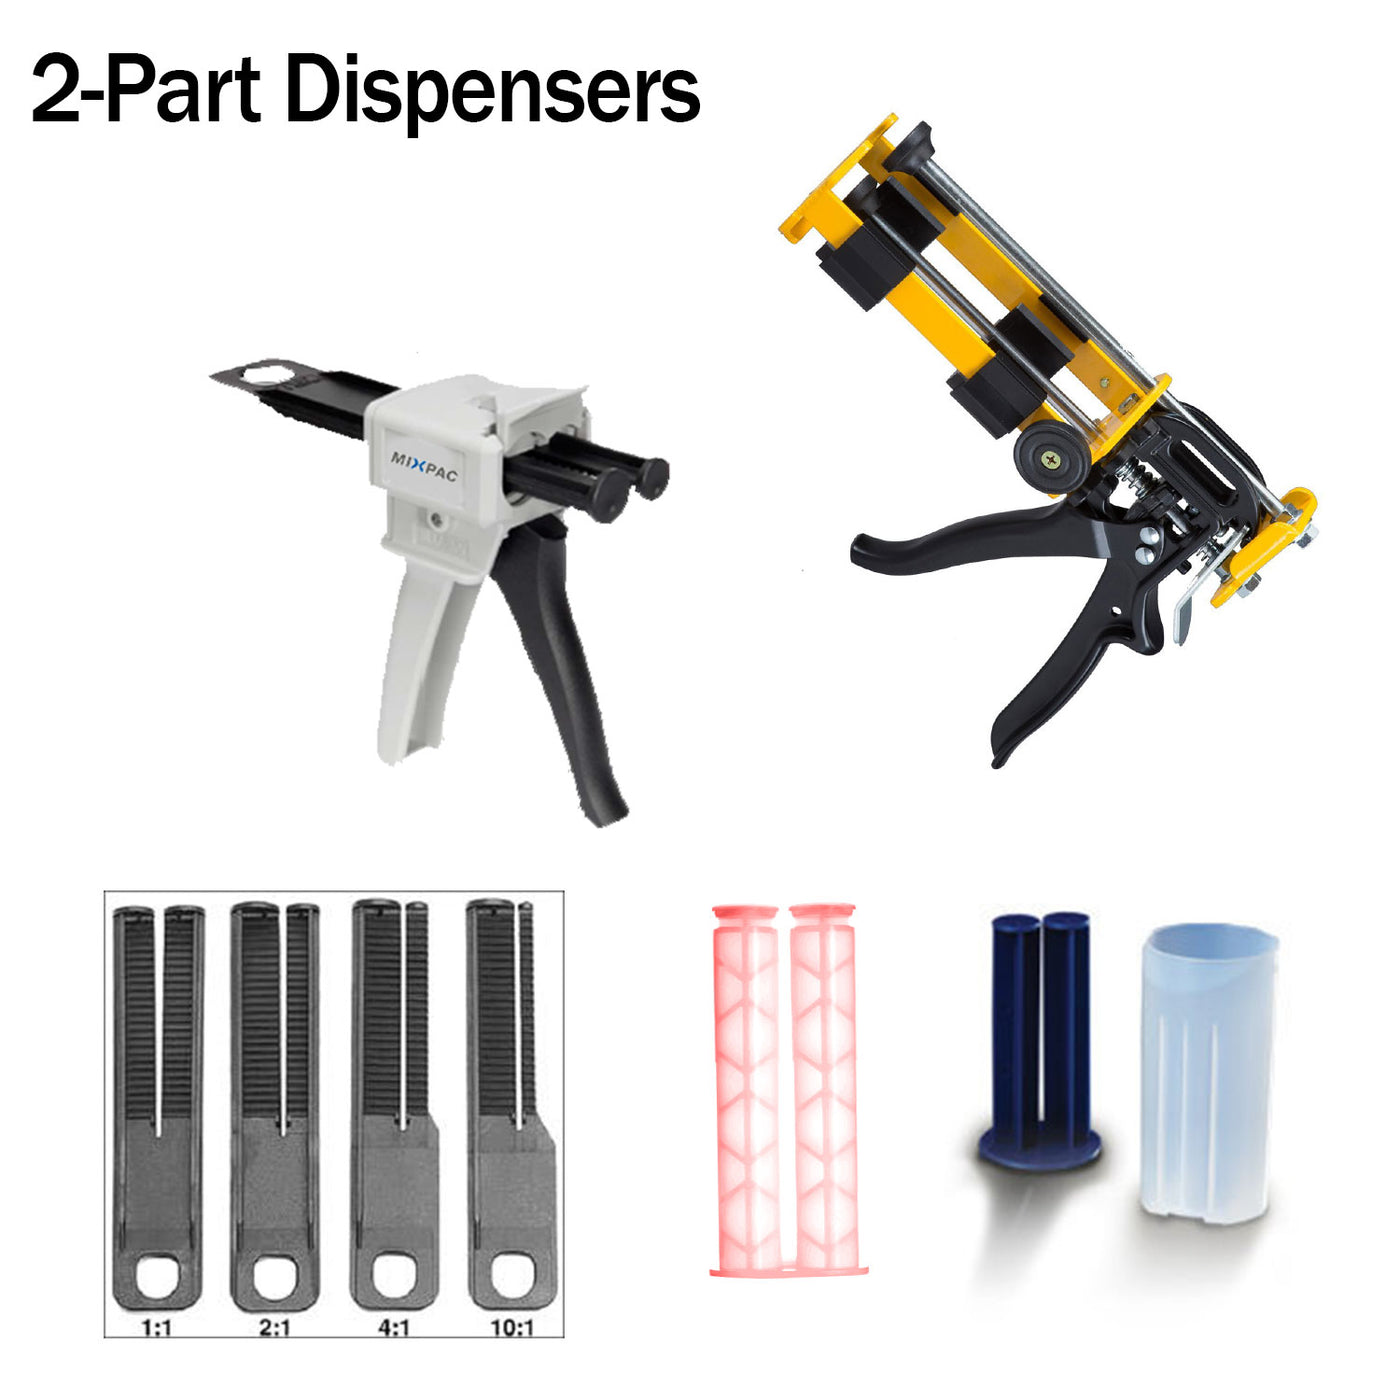 50ml 2-Part Adhesive Dispensers For Industrial Applications: Focusing On The Key Features